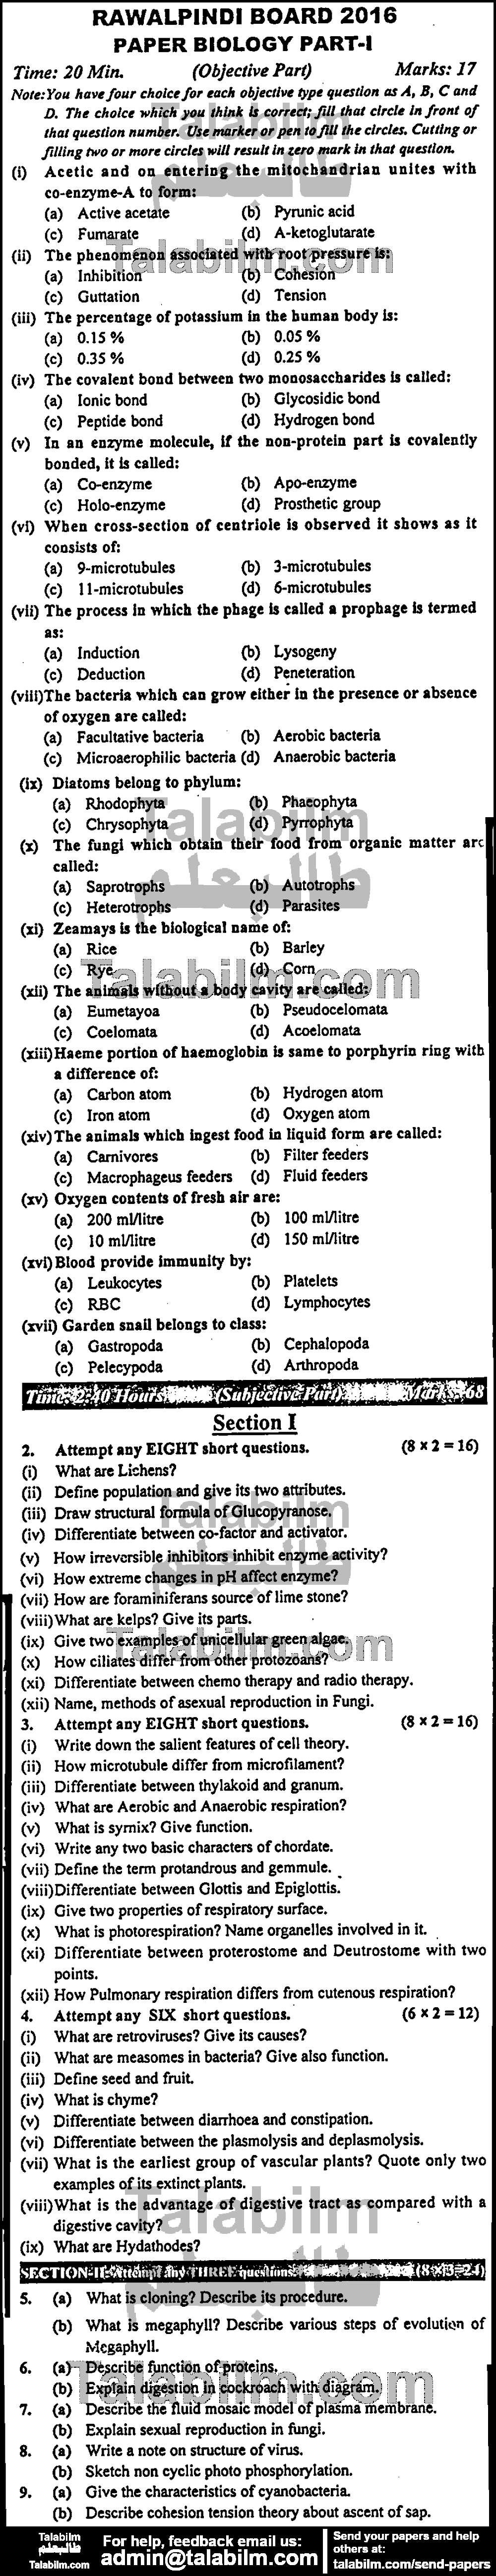 Biology 0 past paper for Group-I 2016